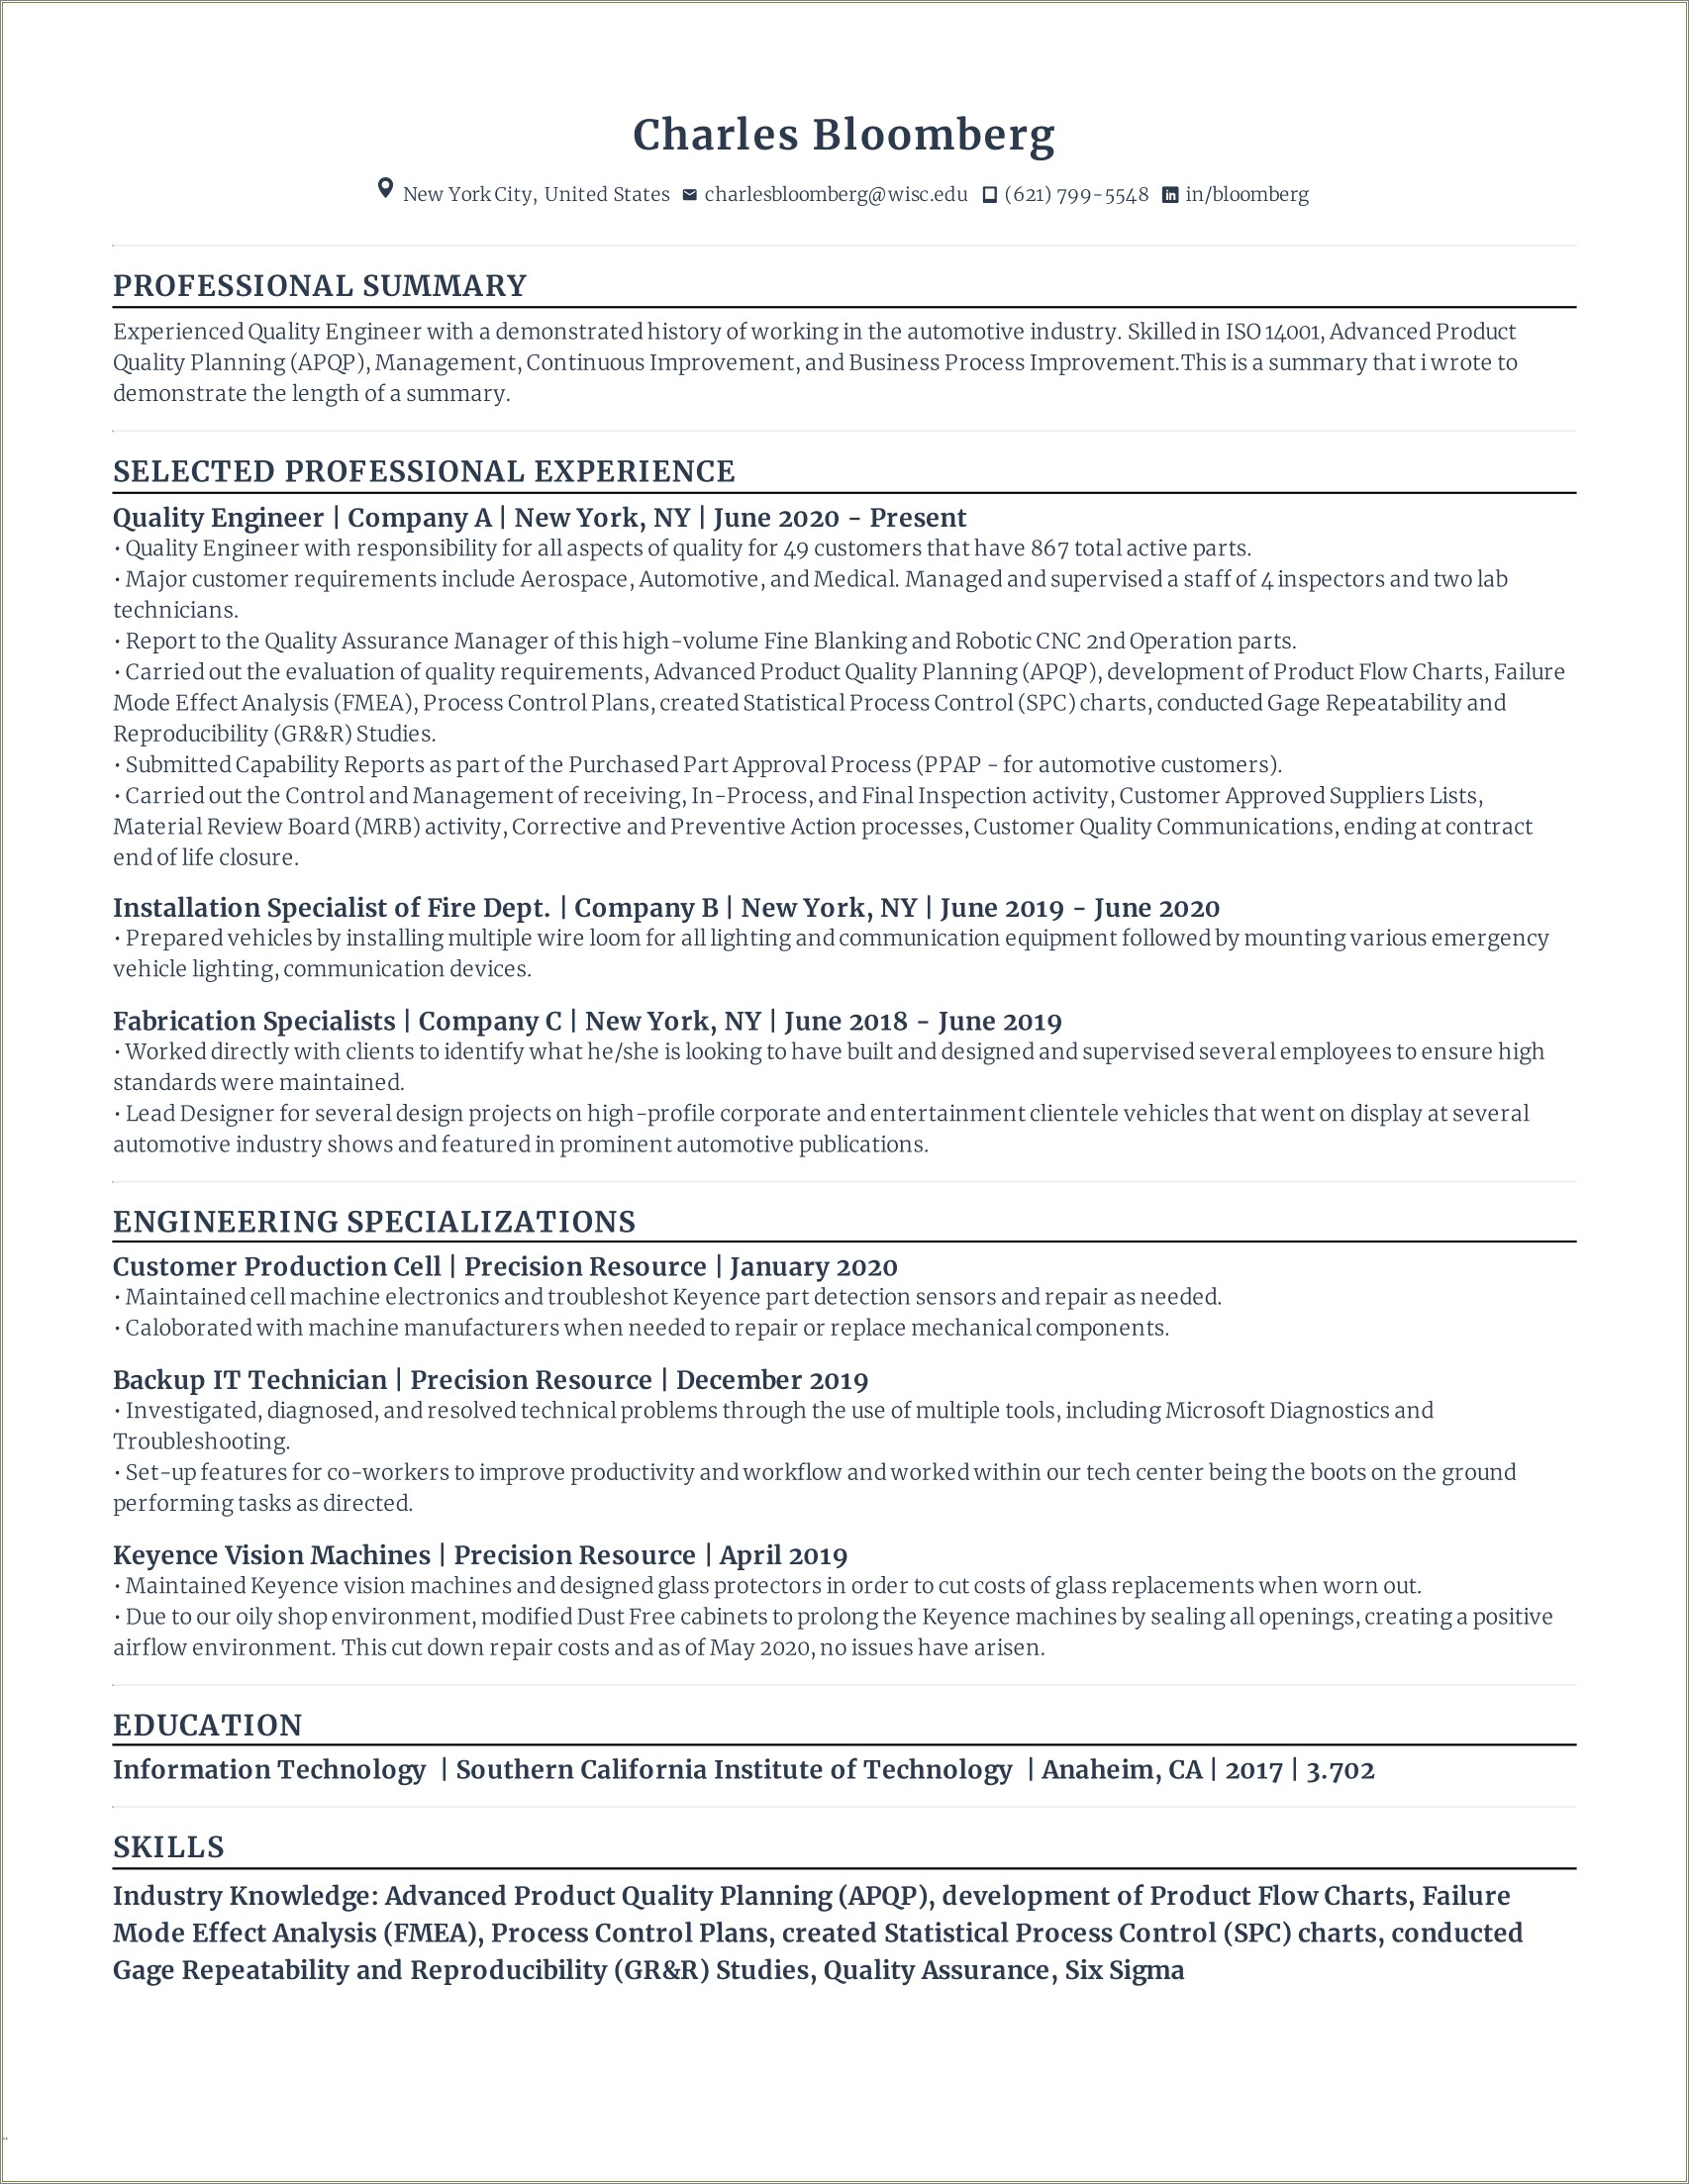 Resume Sample For First Time Job Seeker